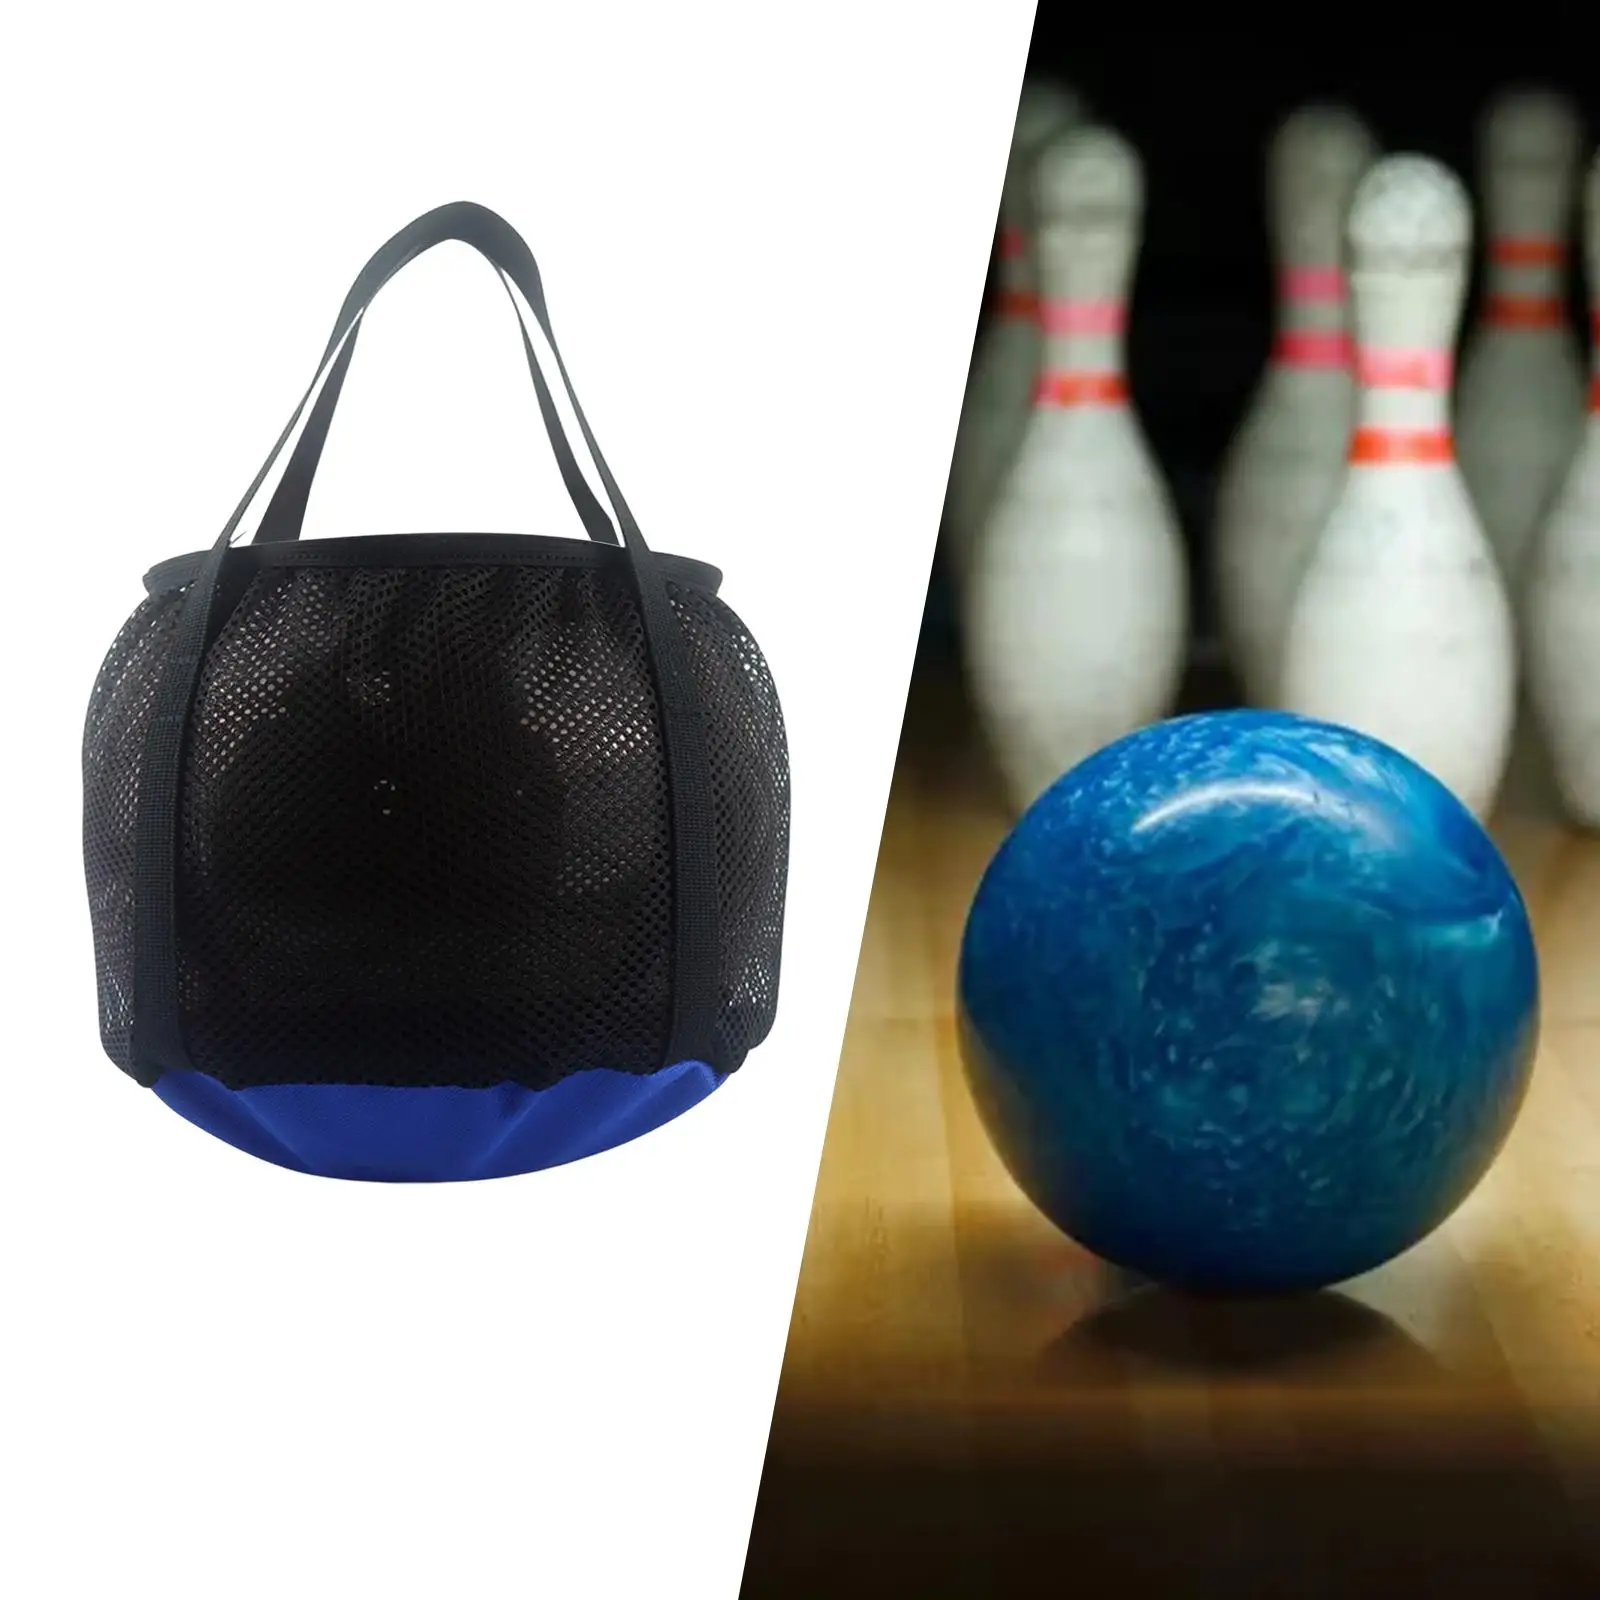 Lightweight Bowling Ball Bags Carrier Bag Pouch Bowling Ball Holder Tote for Bowling Accessories Women Men Gym Ball Exercise